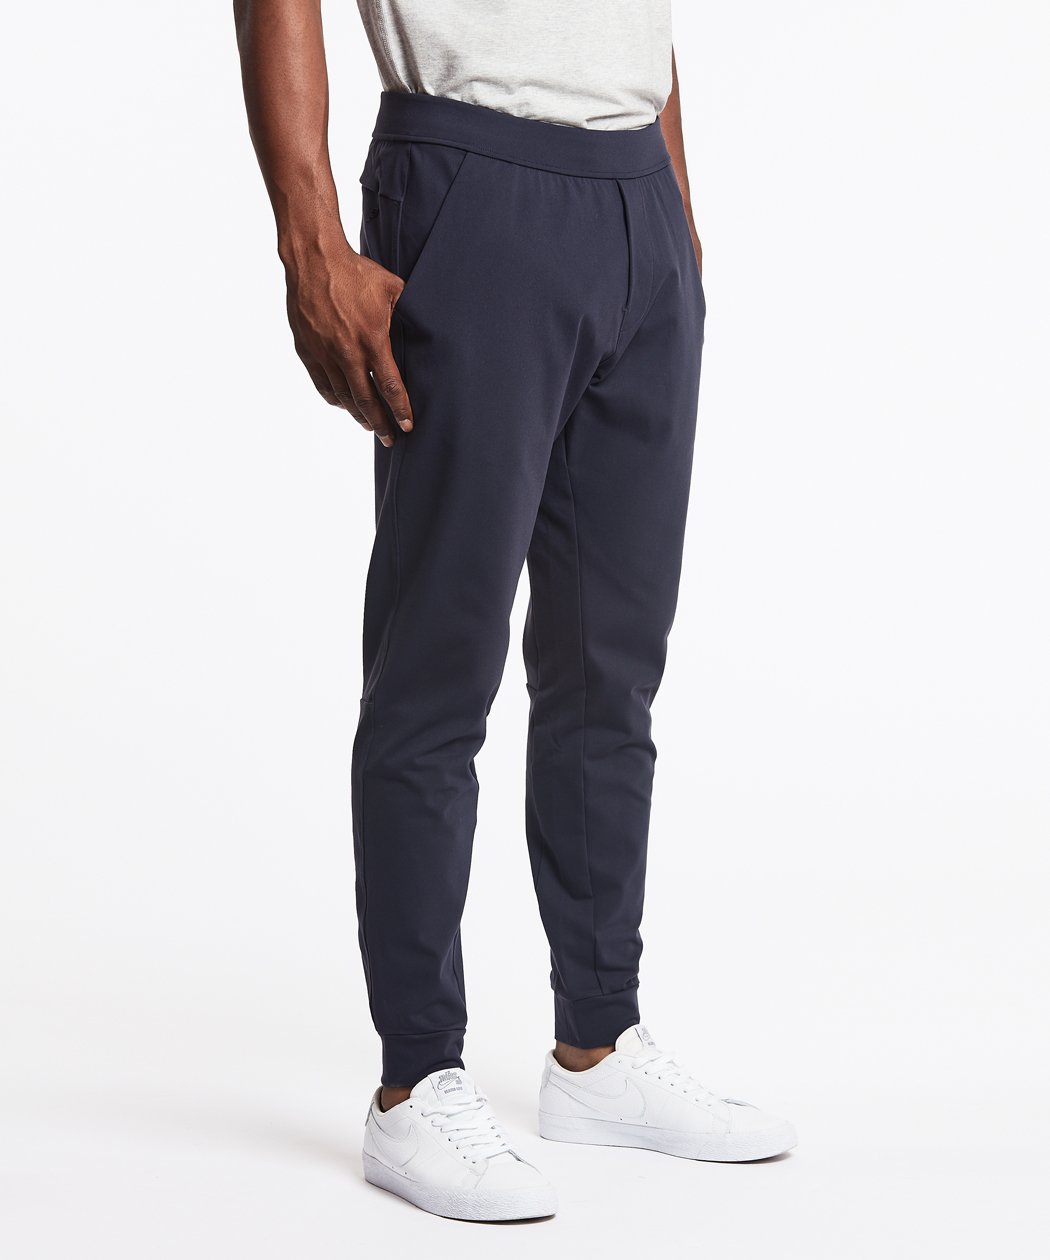 Sweatpants, The All-Day Joggers: Navy